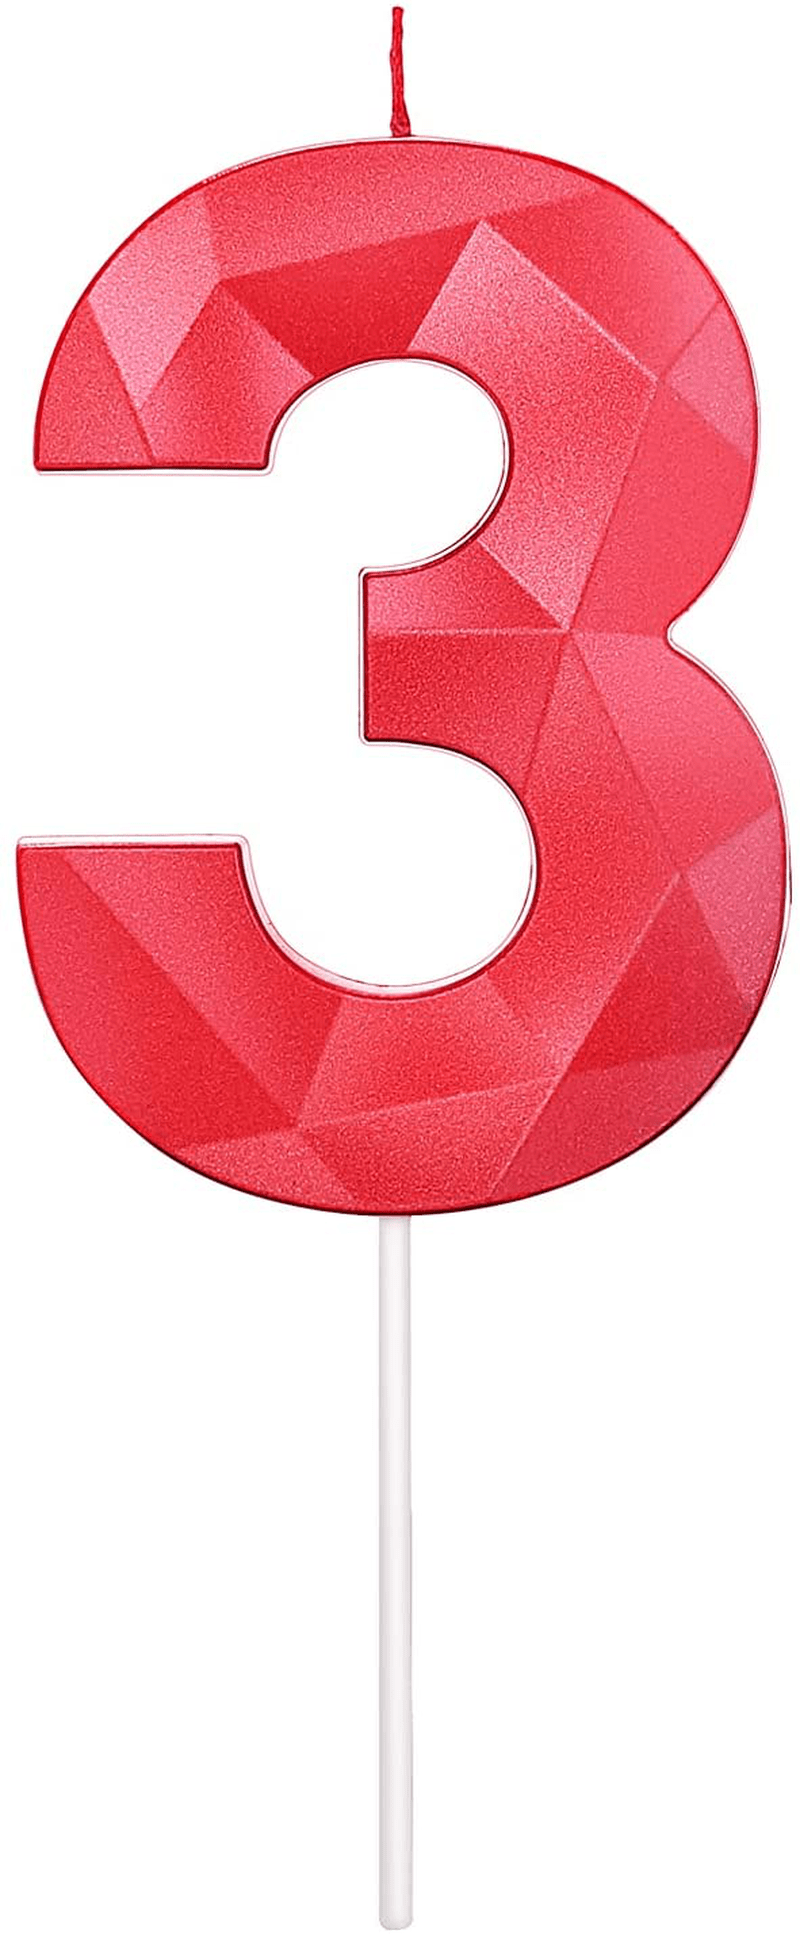 2.76 Inches 3D Diamond Shape Birthday Cake Candle Number 2 ,Red Color Happy Birthday Cake Cupcake Toppers Decoration for Wedding Anniversary,Party Celebration,Family Baking(RED Number 2) Home & Garden > Decor > Home Fragrances > Candles MEIMEI Red number 3 